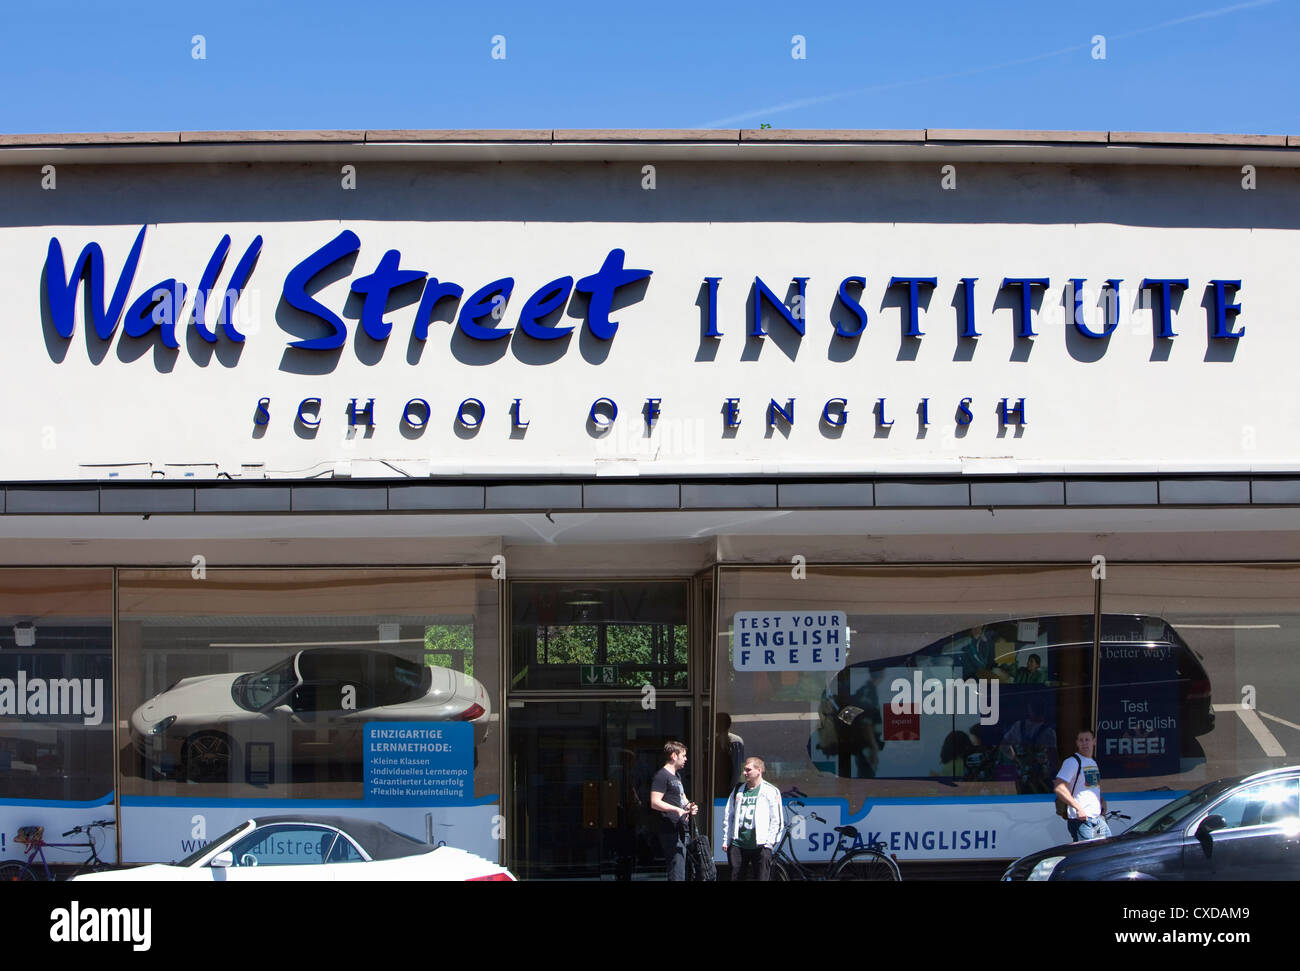 wallstreet institute, School for English, Cologne, Germany, Stock Photo